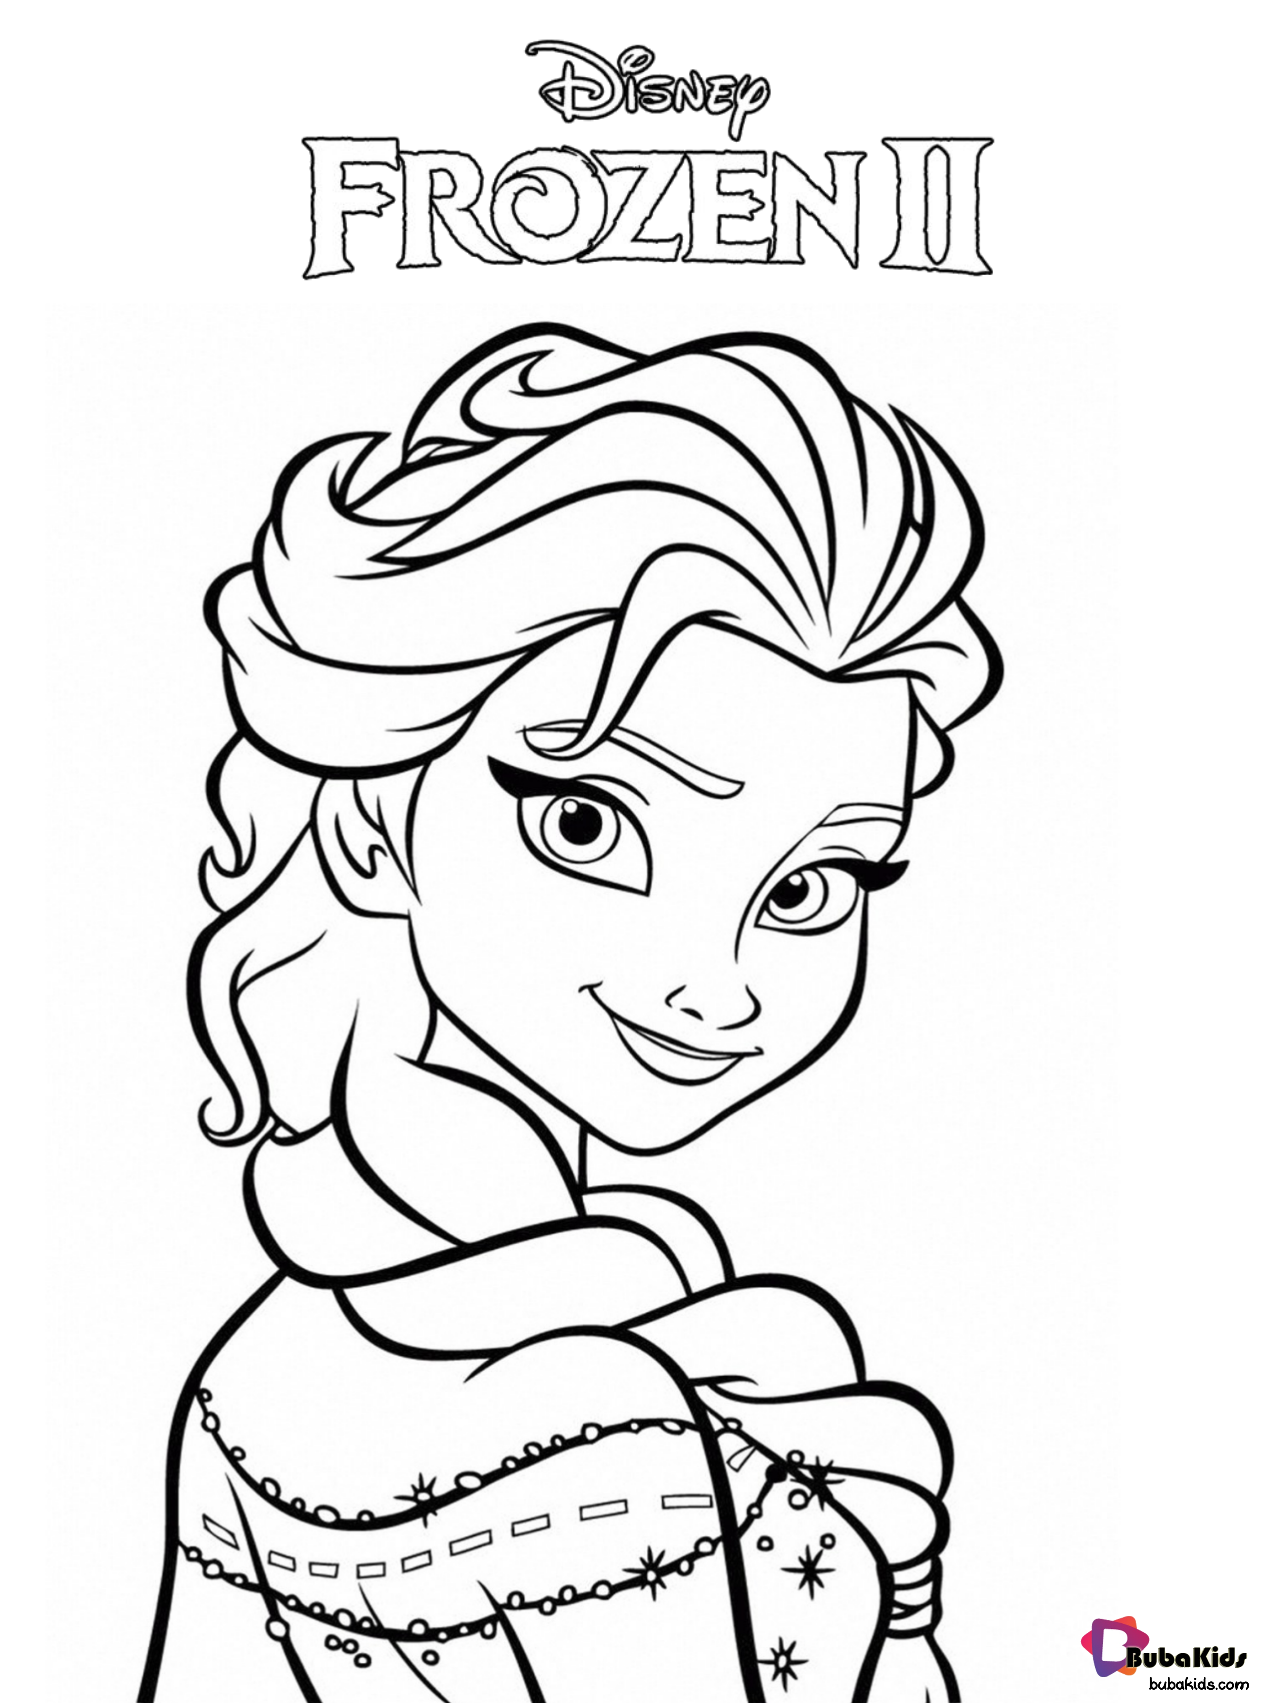 Free download and printable Frozen 2 coloring page.